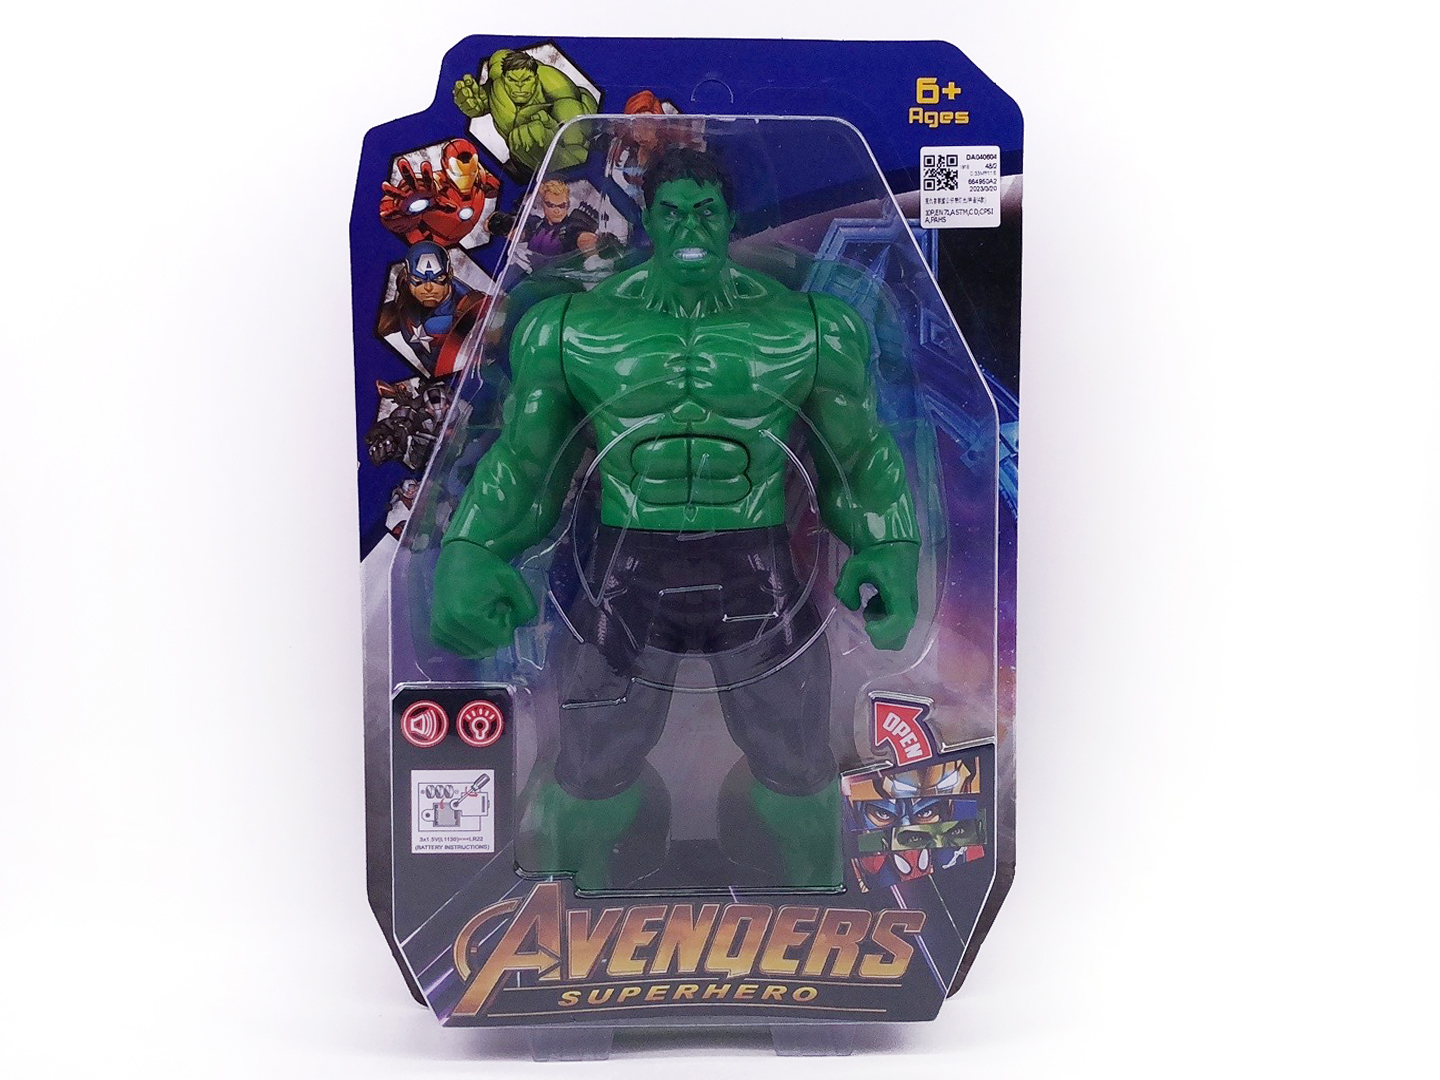 The Avengers W/L_S(4S) toys